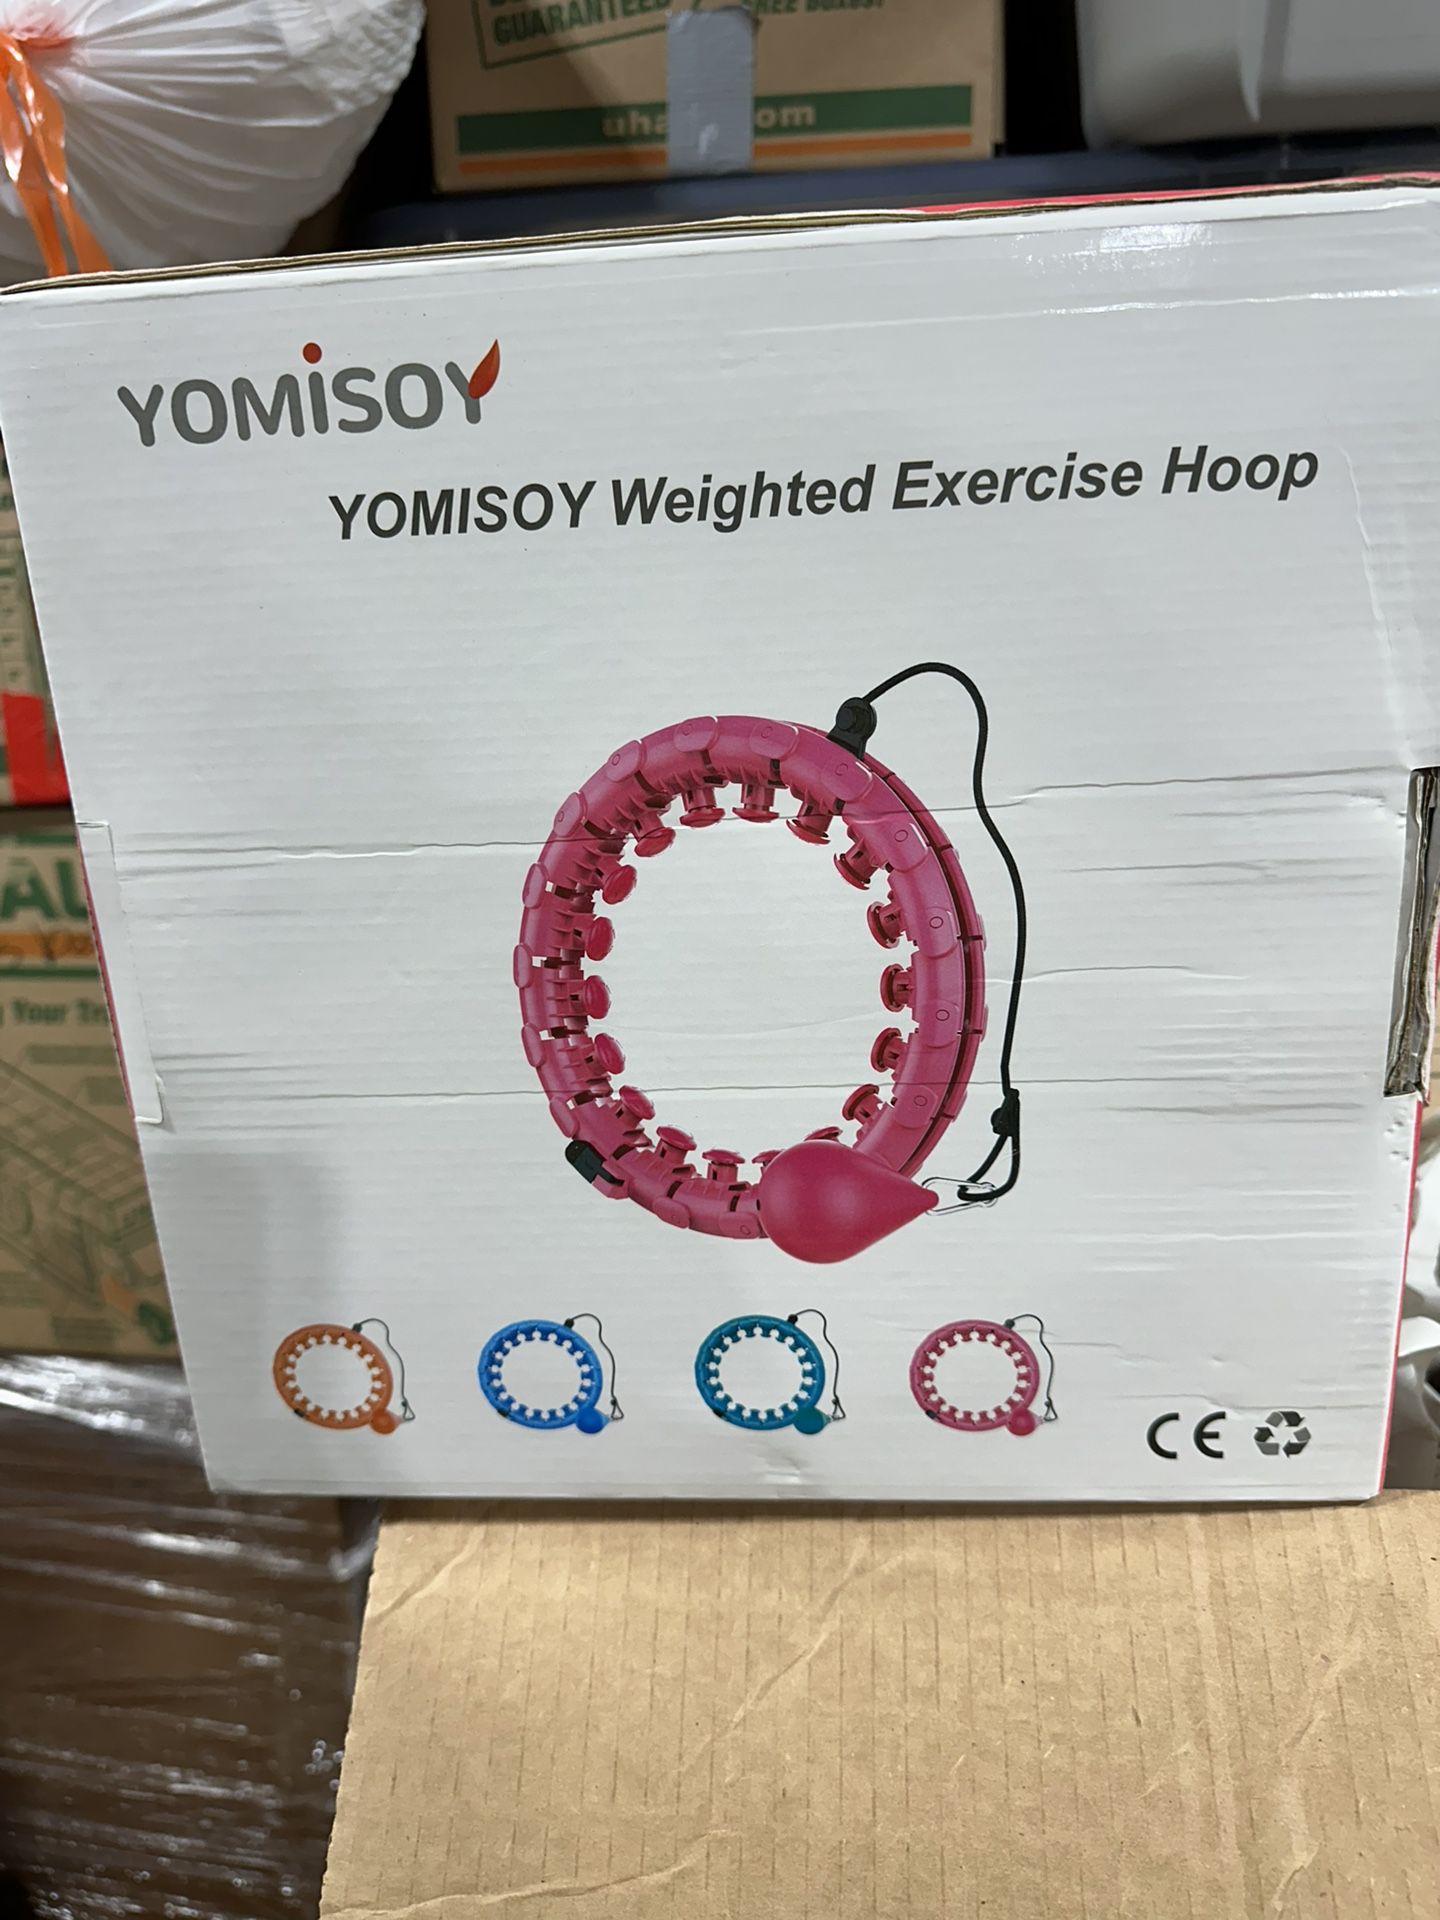 Yomisoy Weighted Exercise Hoop